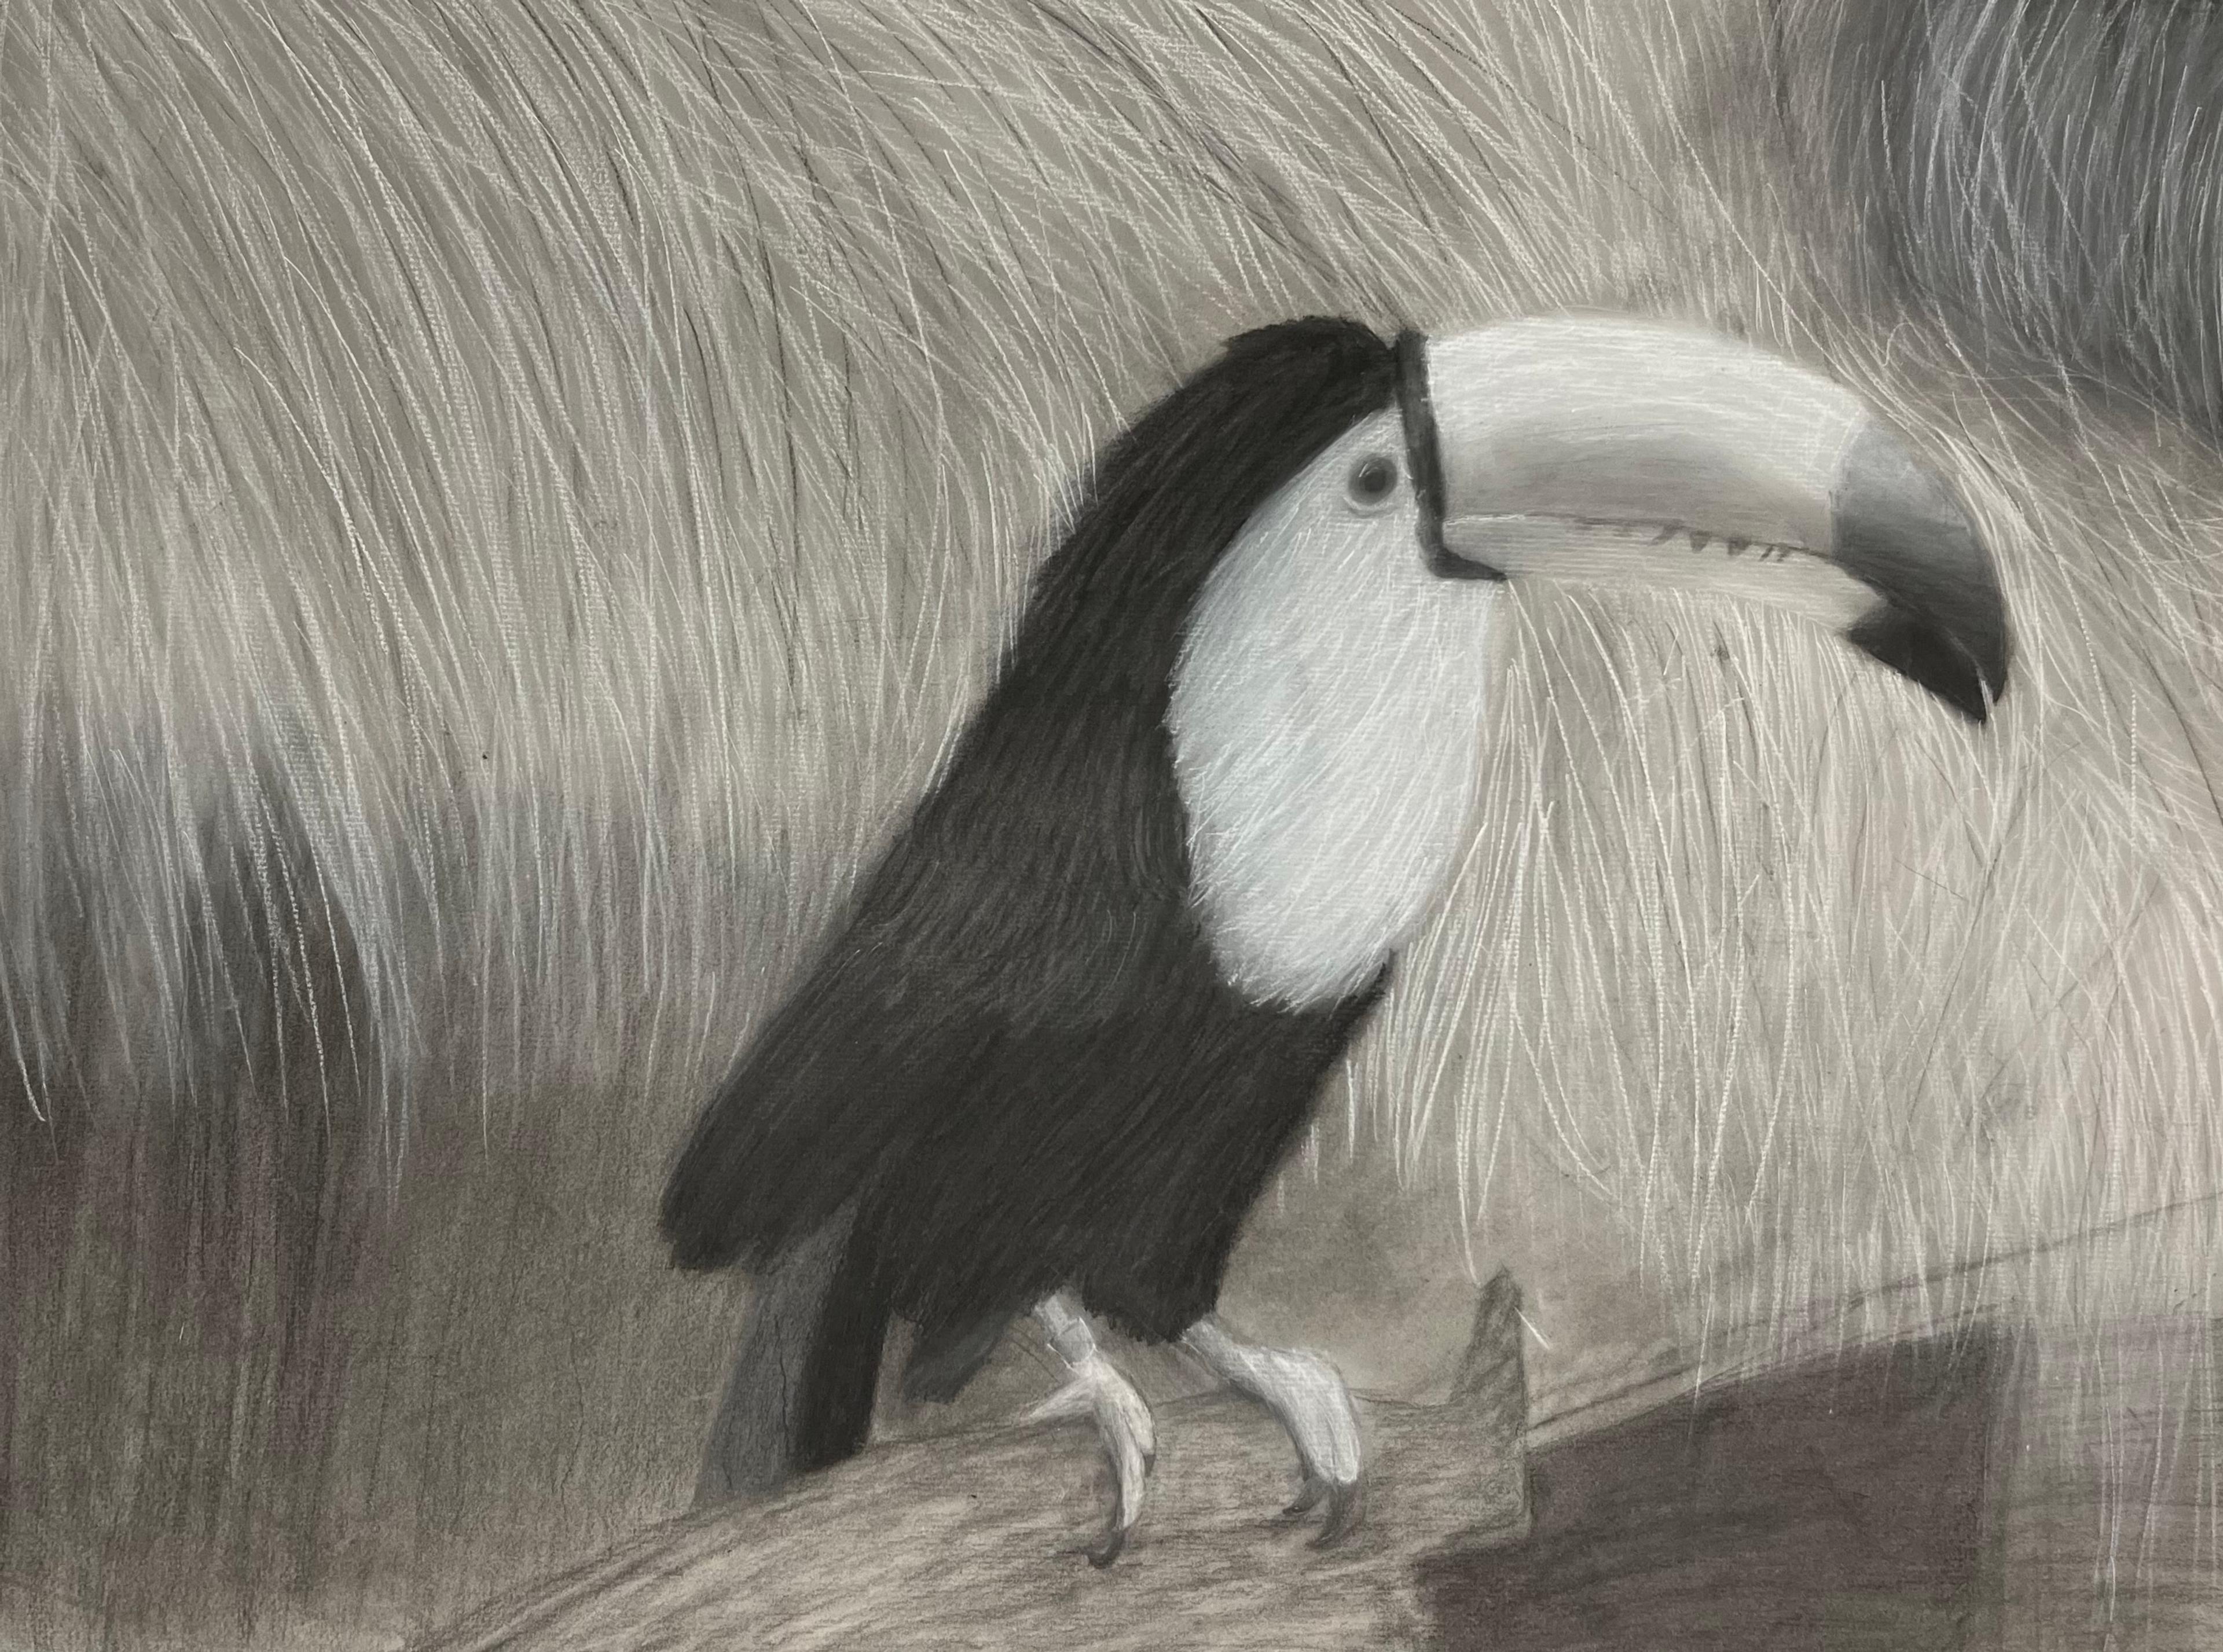 Black-and-white charcoal drawing of a toucan perched on a branch, facing right. The background is composed of finely drawn hanging foliage that resembles the consistency of straw.